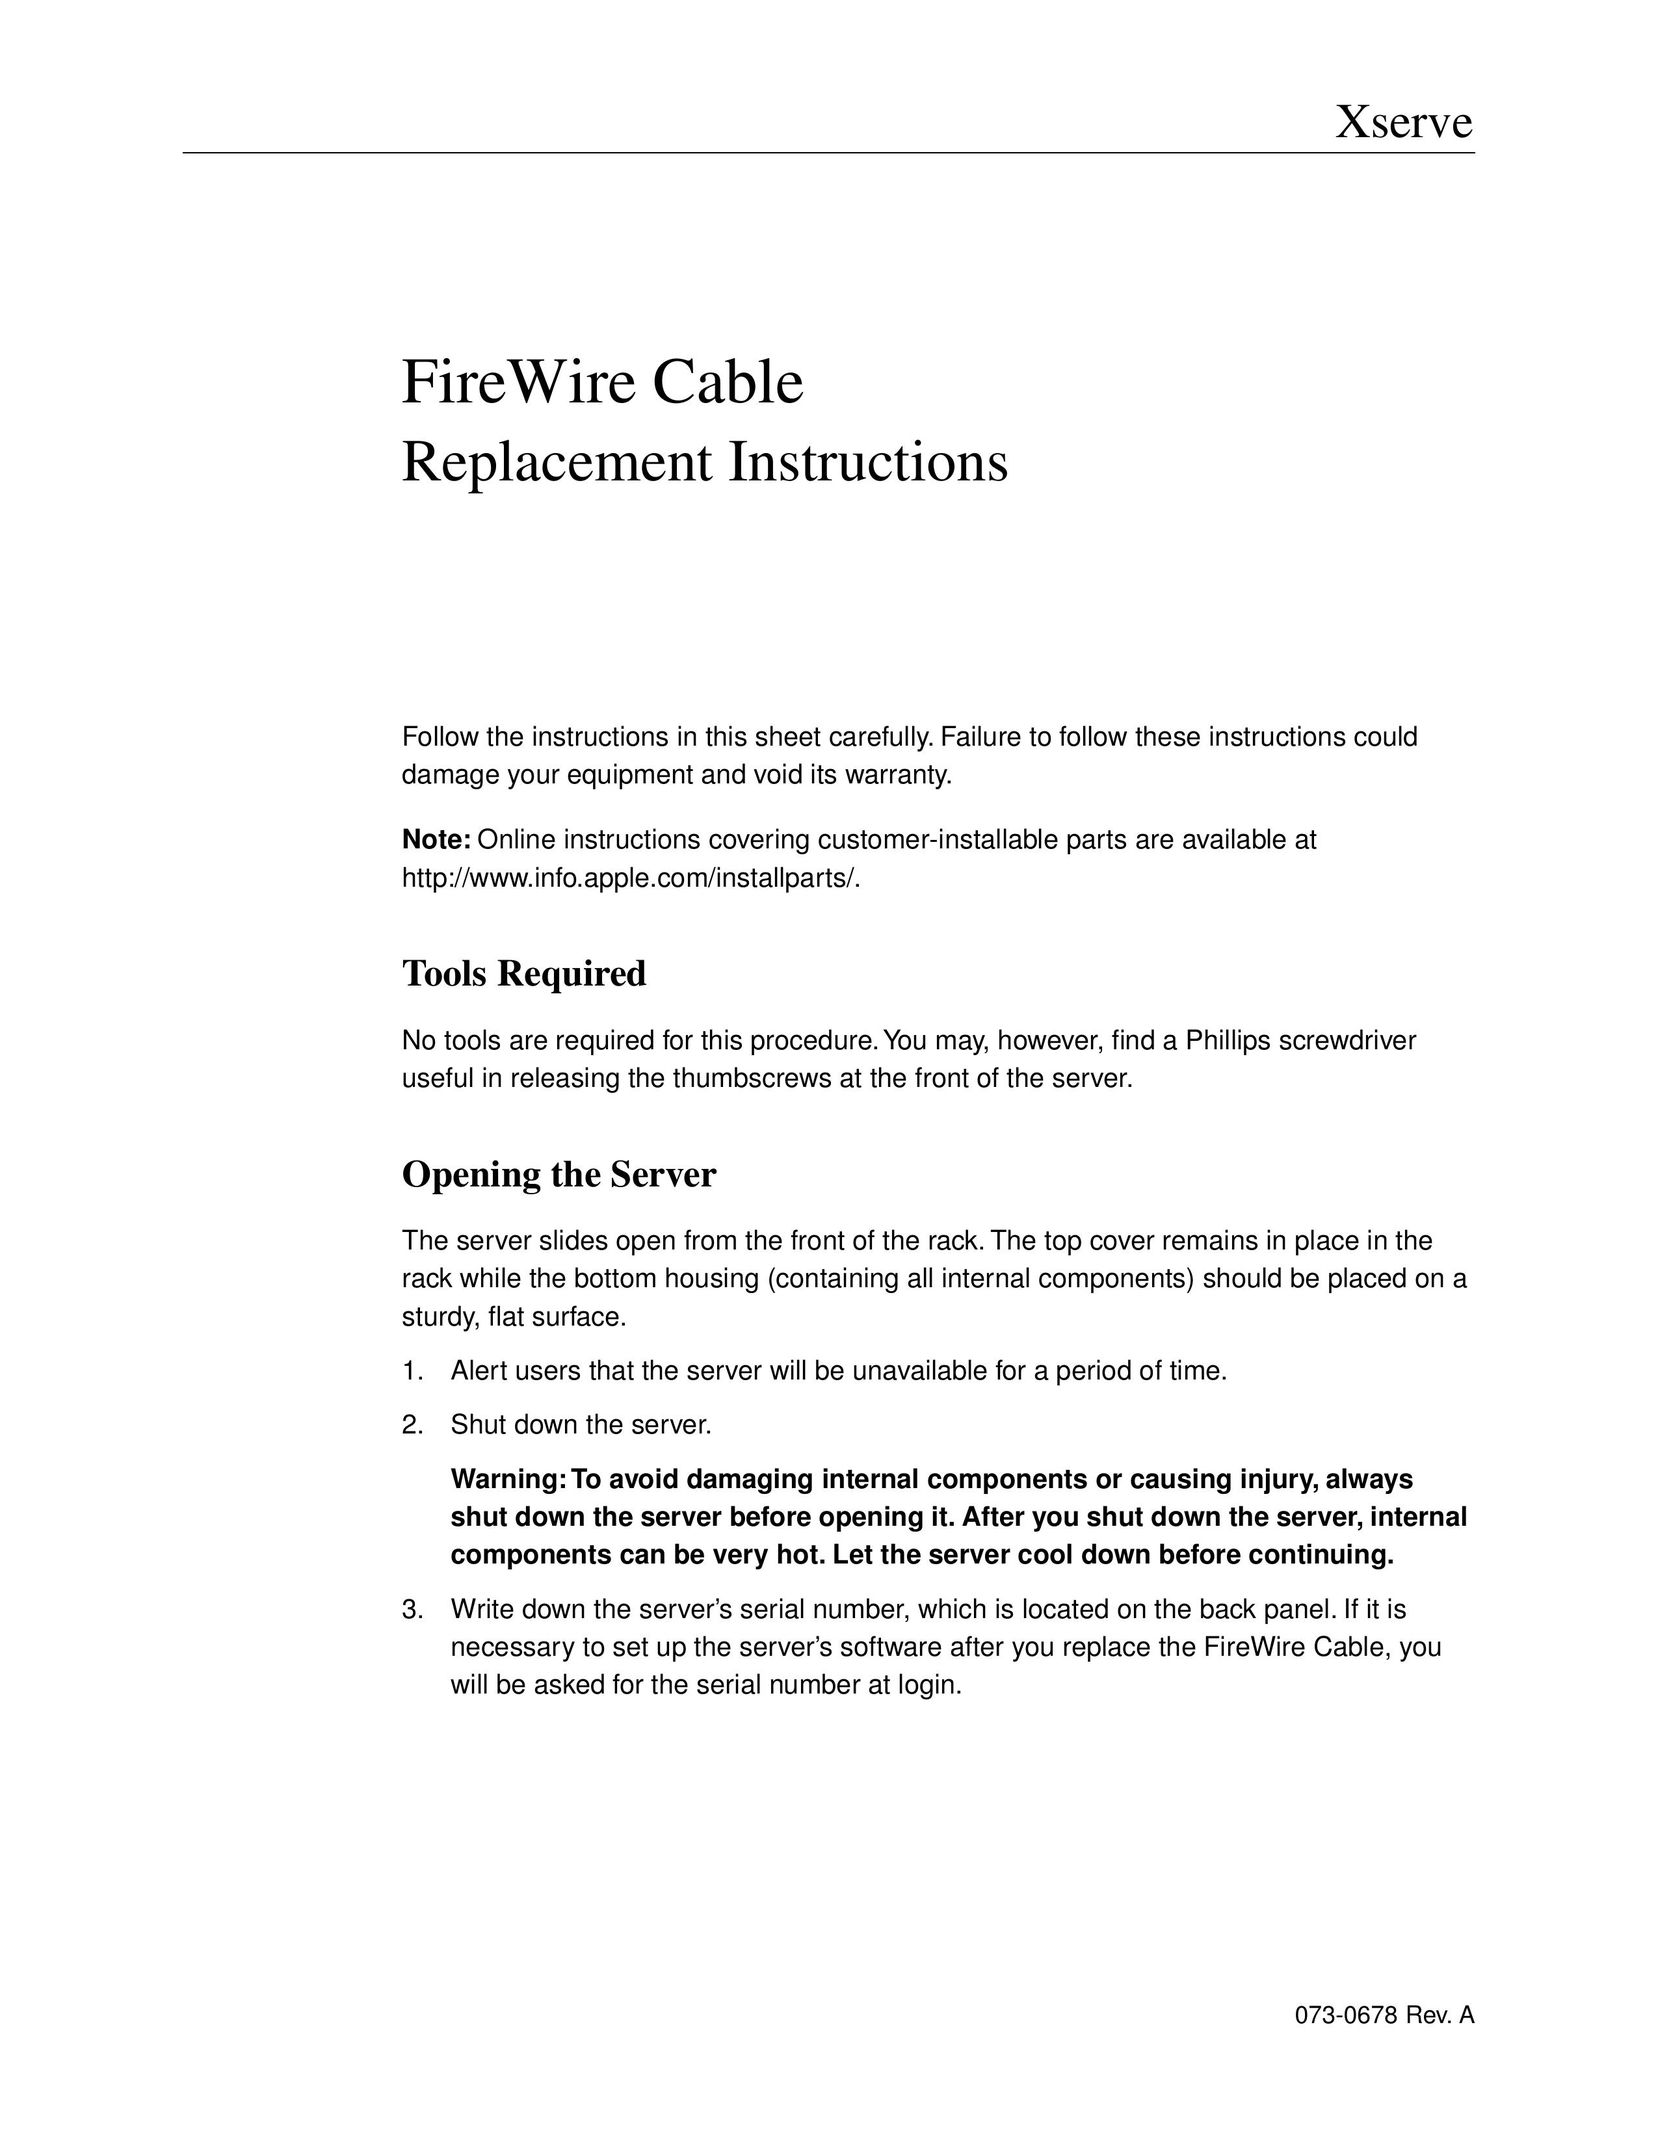 Apple FireWire Cable Computer Hardware User Manual